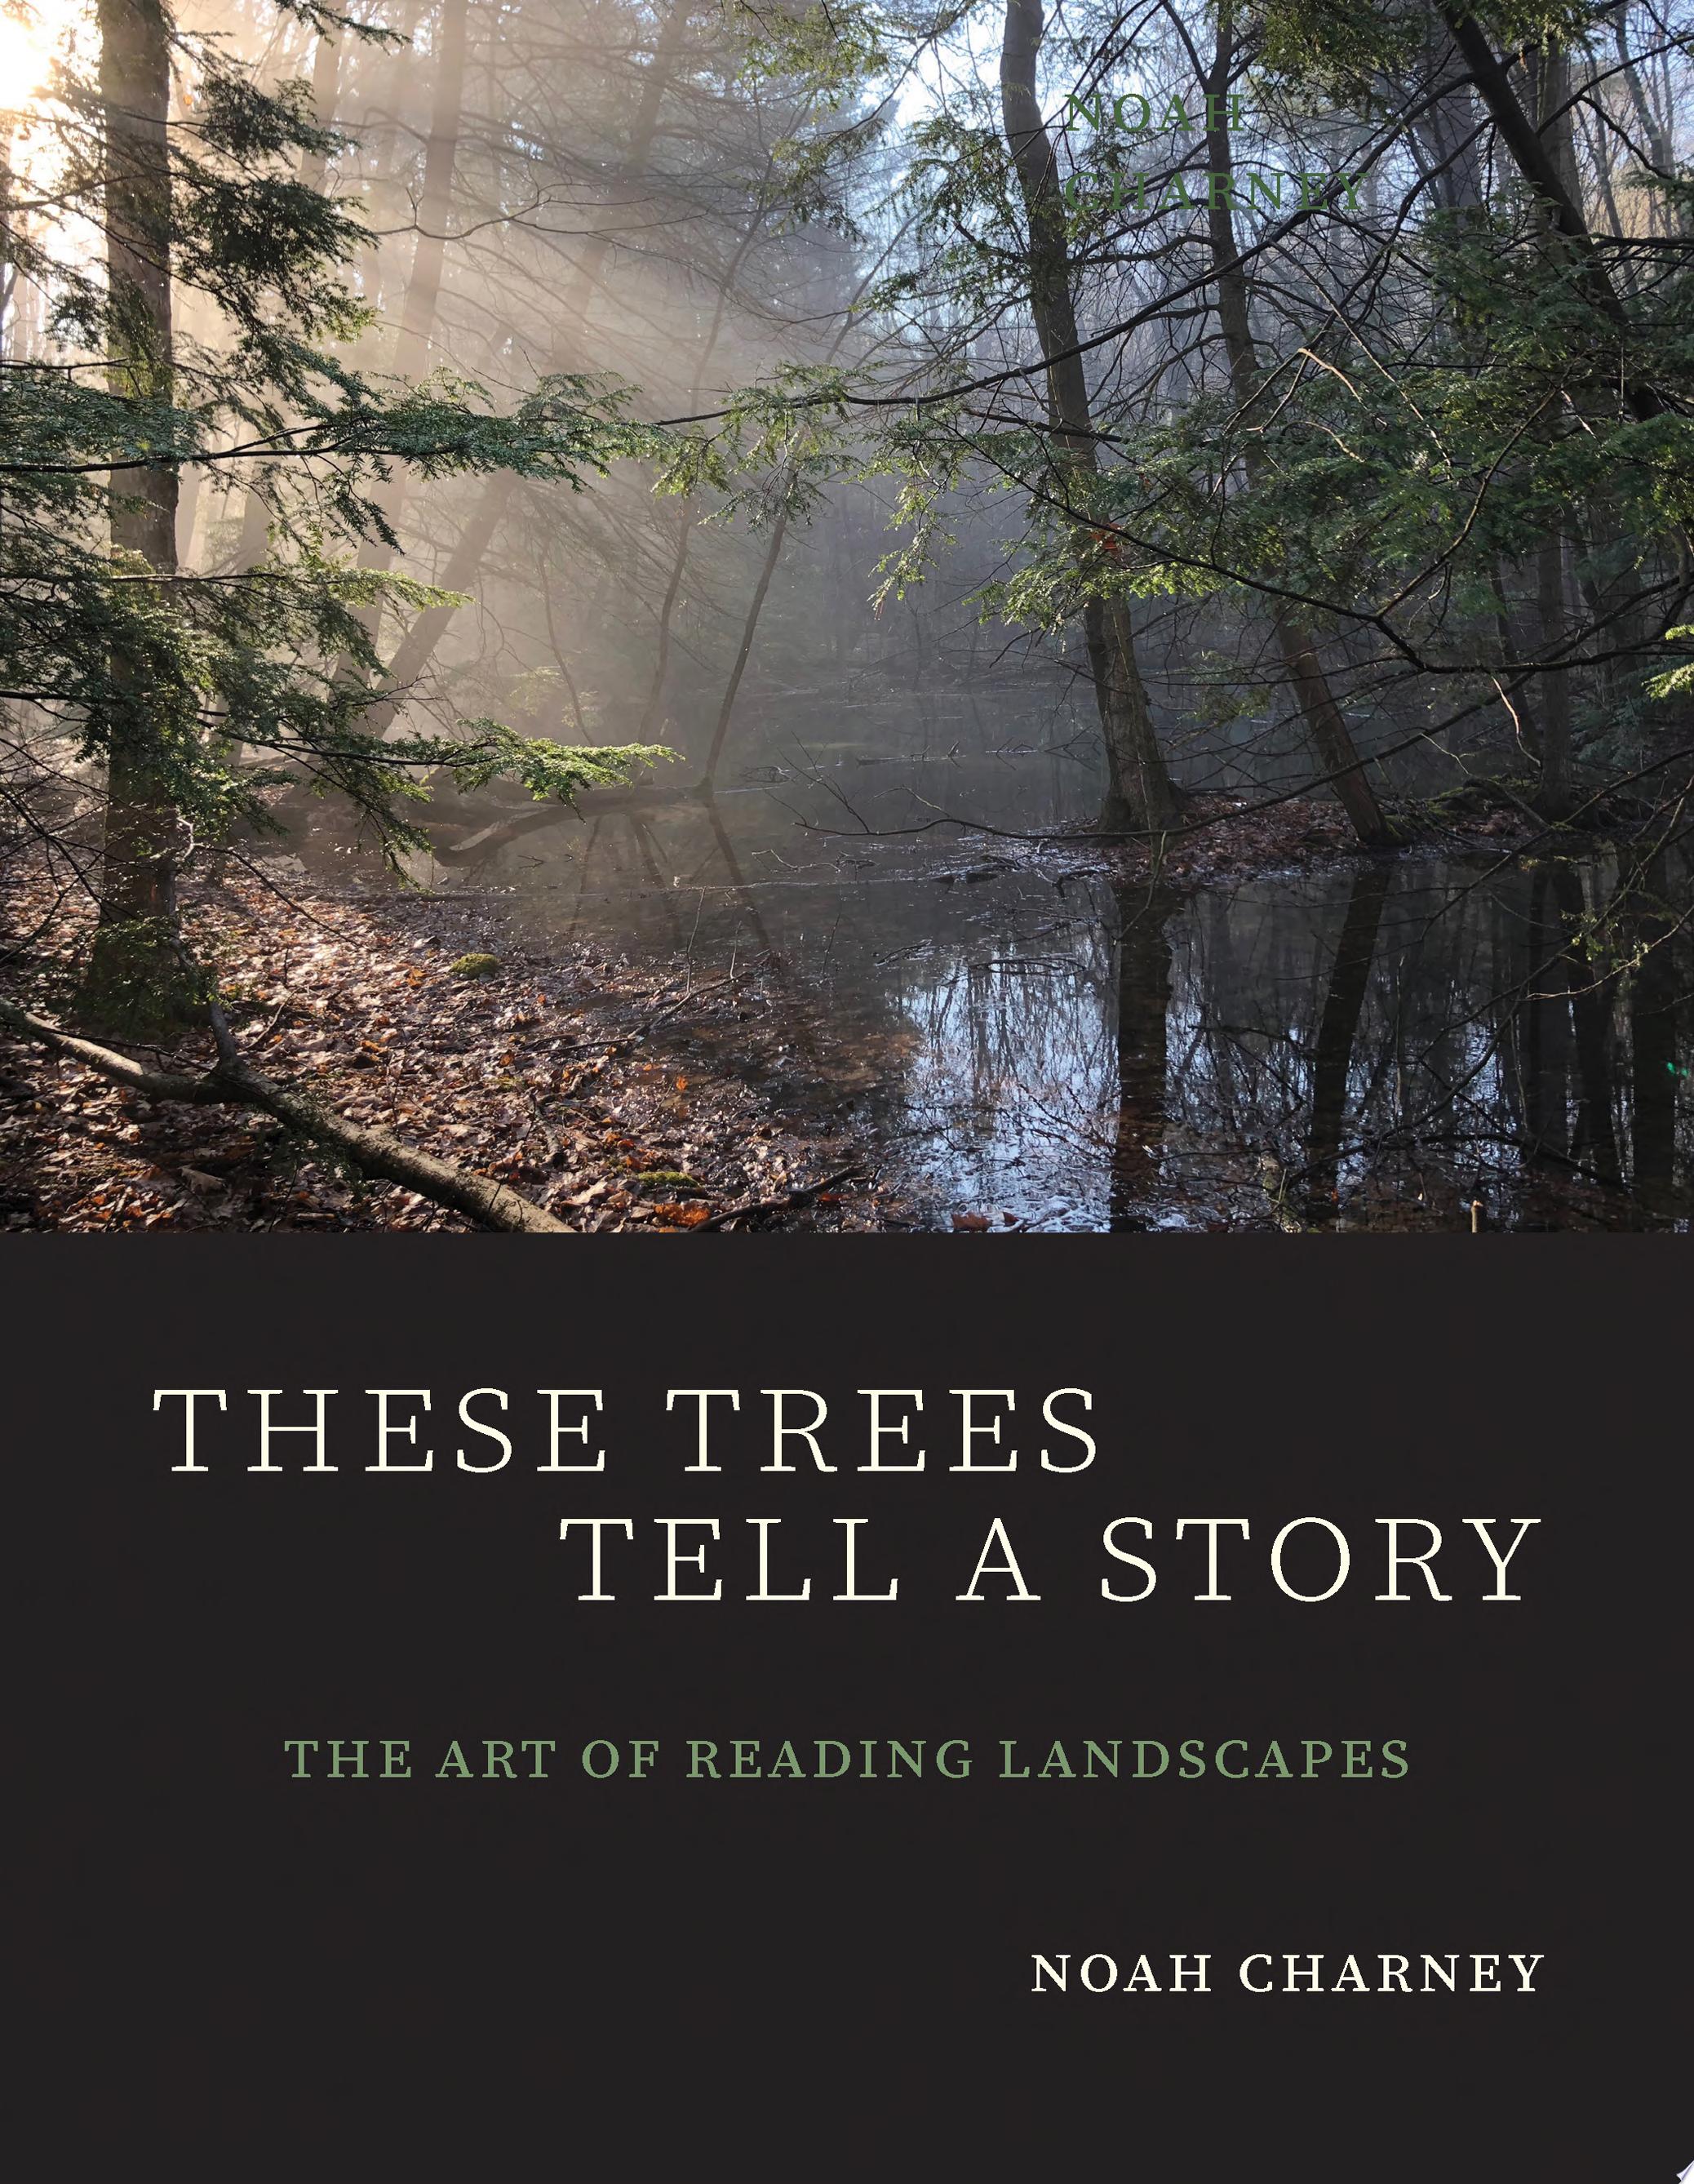 Image for "These Trees Tell a Story"